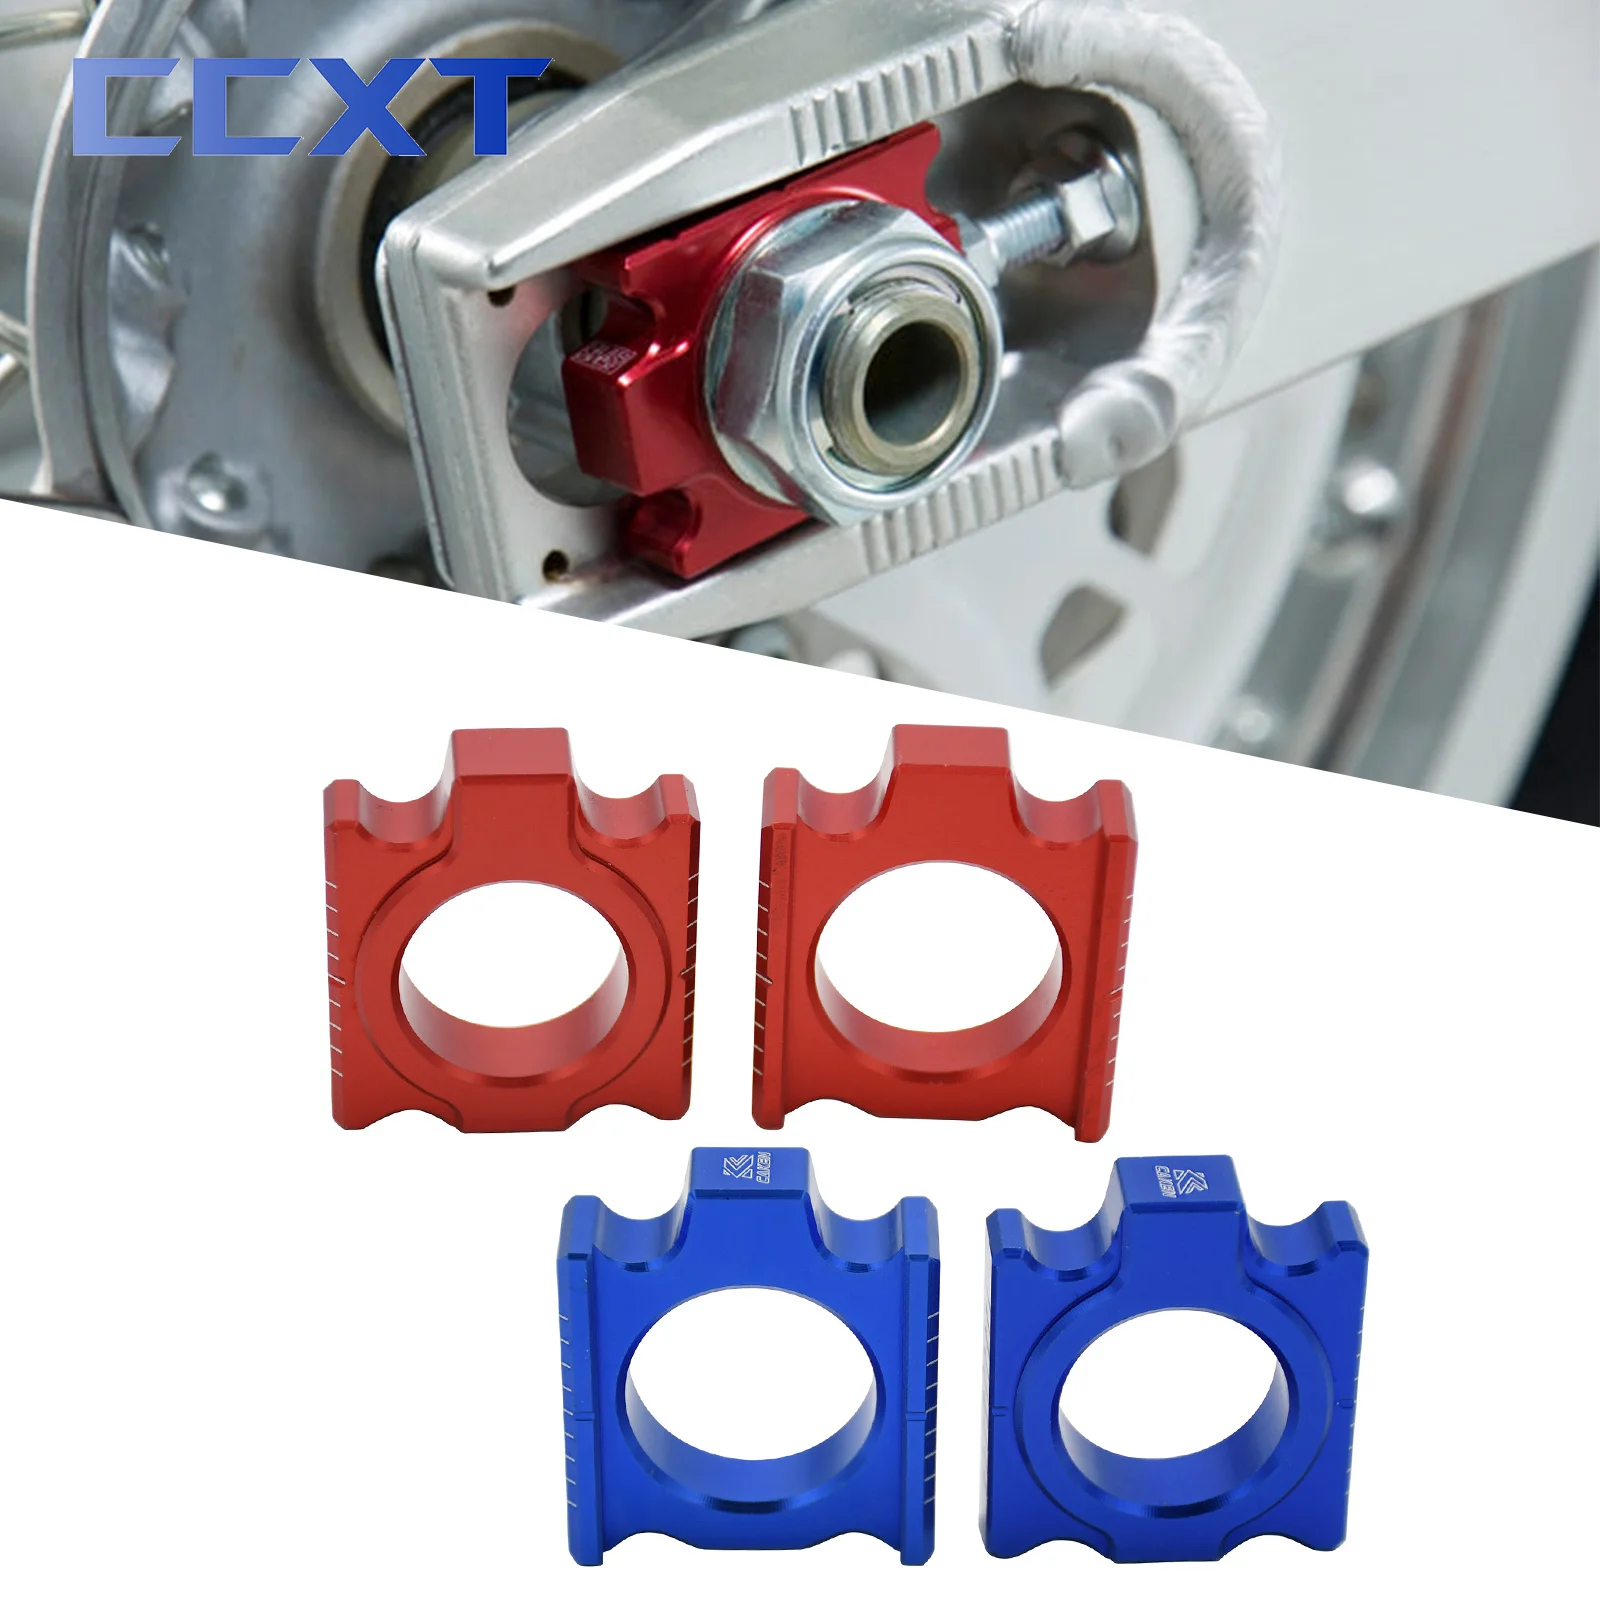 

Motorcycle CNC Rear Chain Adjuster Axle Block For Honda CR CRF CR125R CR250R CRF250R CRF250X CRF450R CRF450X 2002-2016 Universal